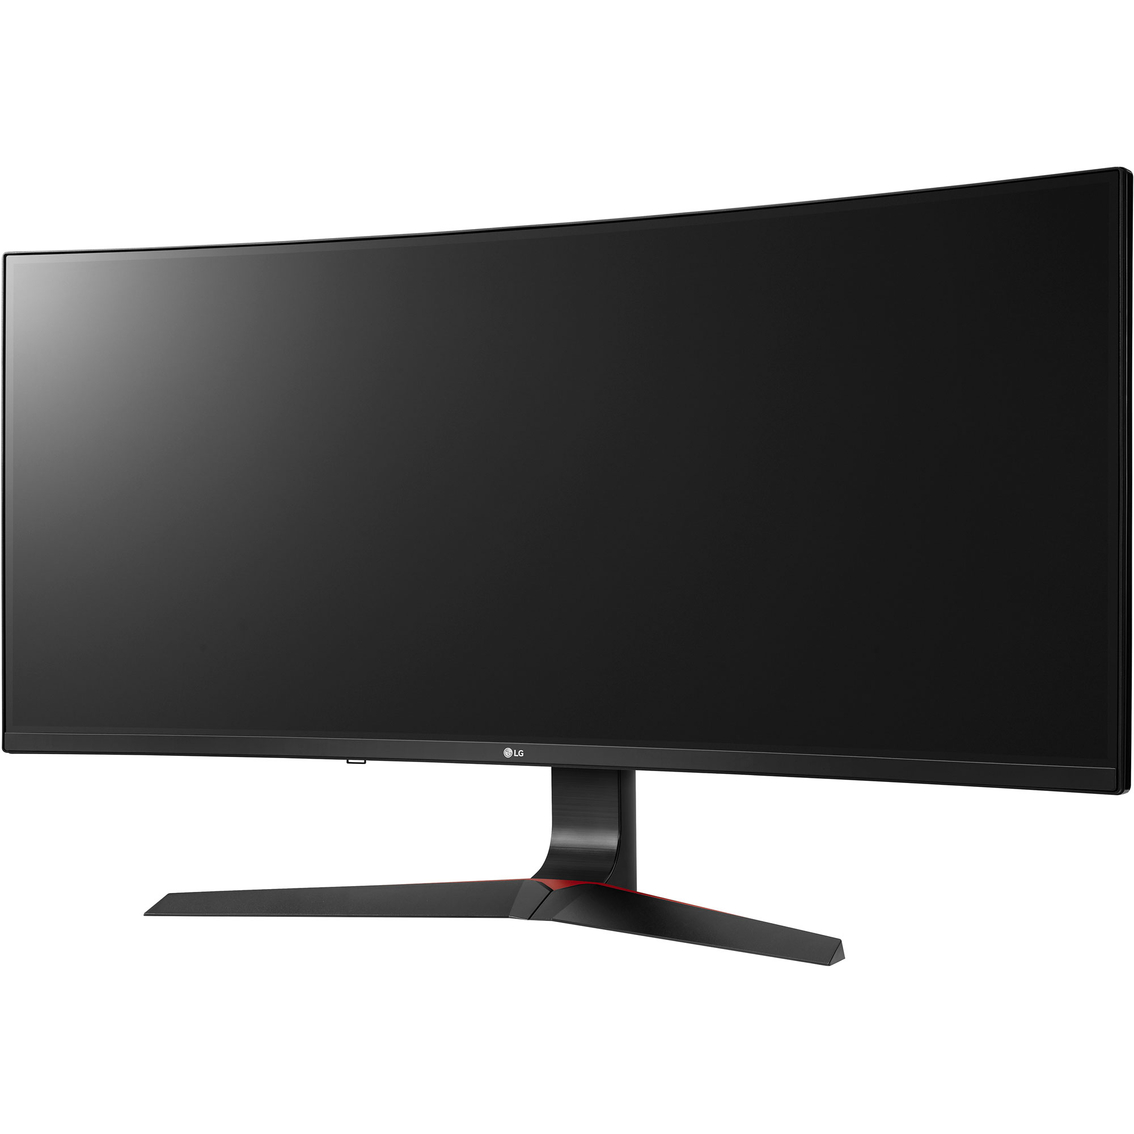 LG 34 in. 144Hz Curved WFHD IPS UltraWide Gaming Monitor 34GL750-B - Image 4 of 10